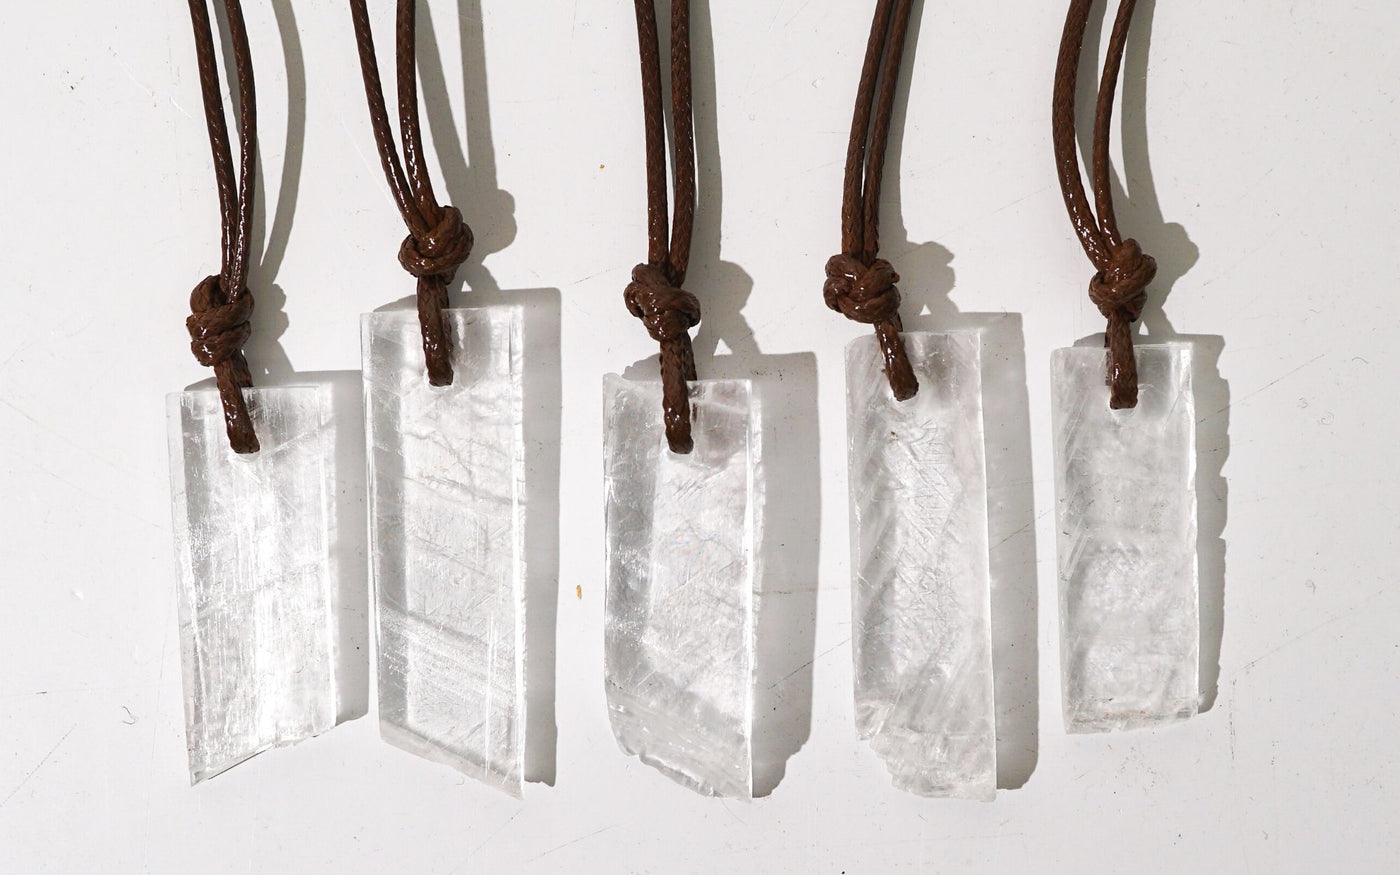 group of 5 genuine natural Selenite pendant necklaces by Energy Muse that show variety in sizes 